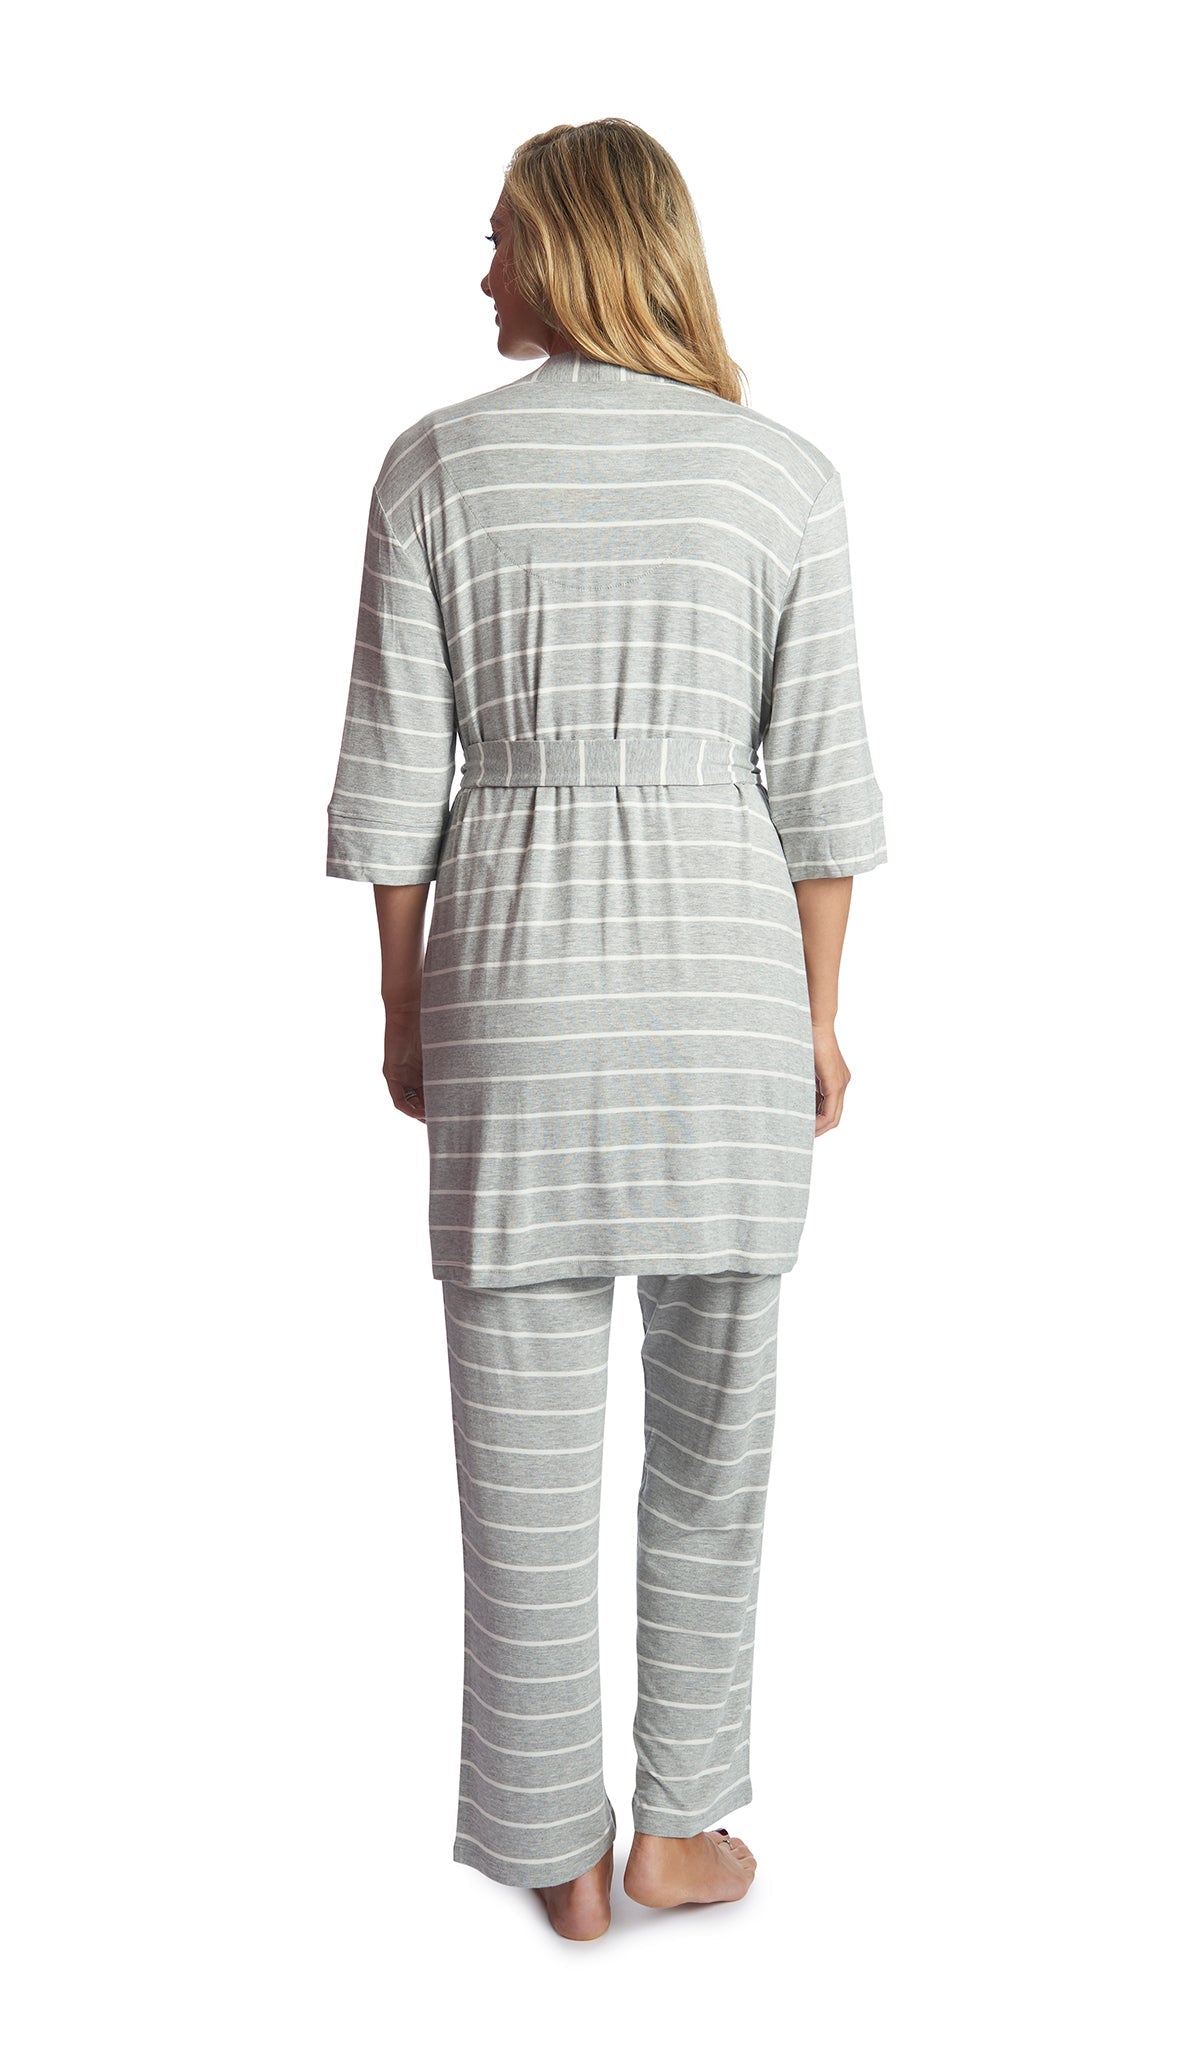 Heather Grey Analise 5-Piece Set, back shot of woman wearing robe and pant.